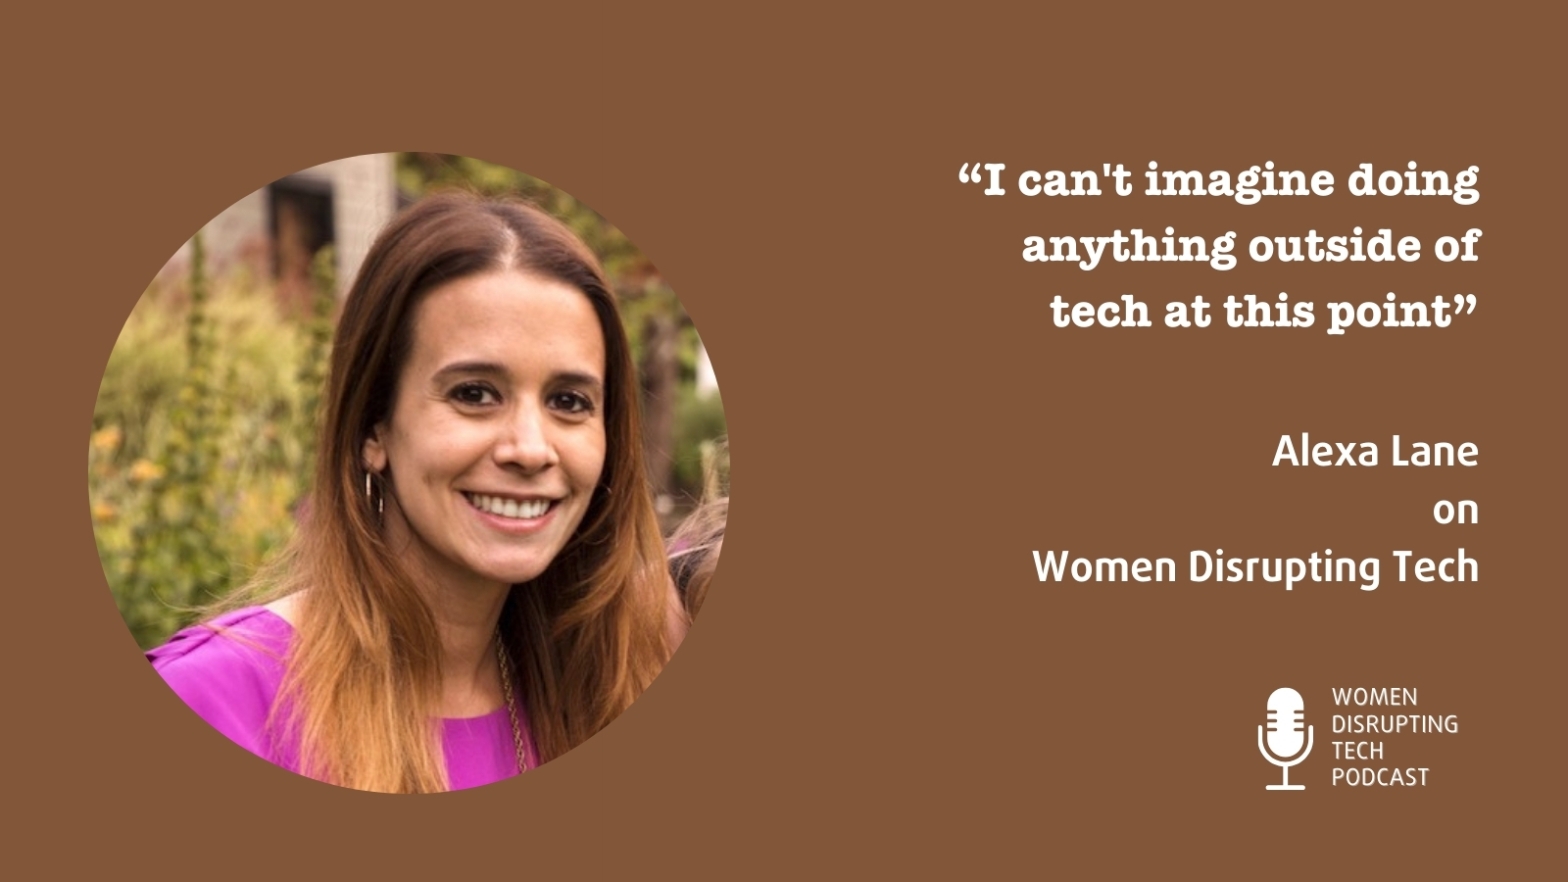 This is a picture of Alexa Lane, Head of Recruitment at Placements.io, with a quote from the interview she did in episode 45 of Women Disrupting Tech. You can listen to the episode by clicking one of the links in the post or by searching for "Women Disrupting Tech" on Spotify or in your favorite podcast player.